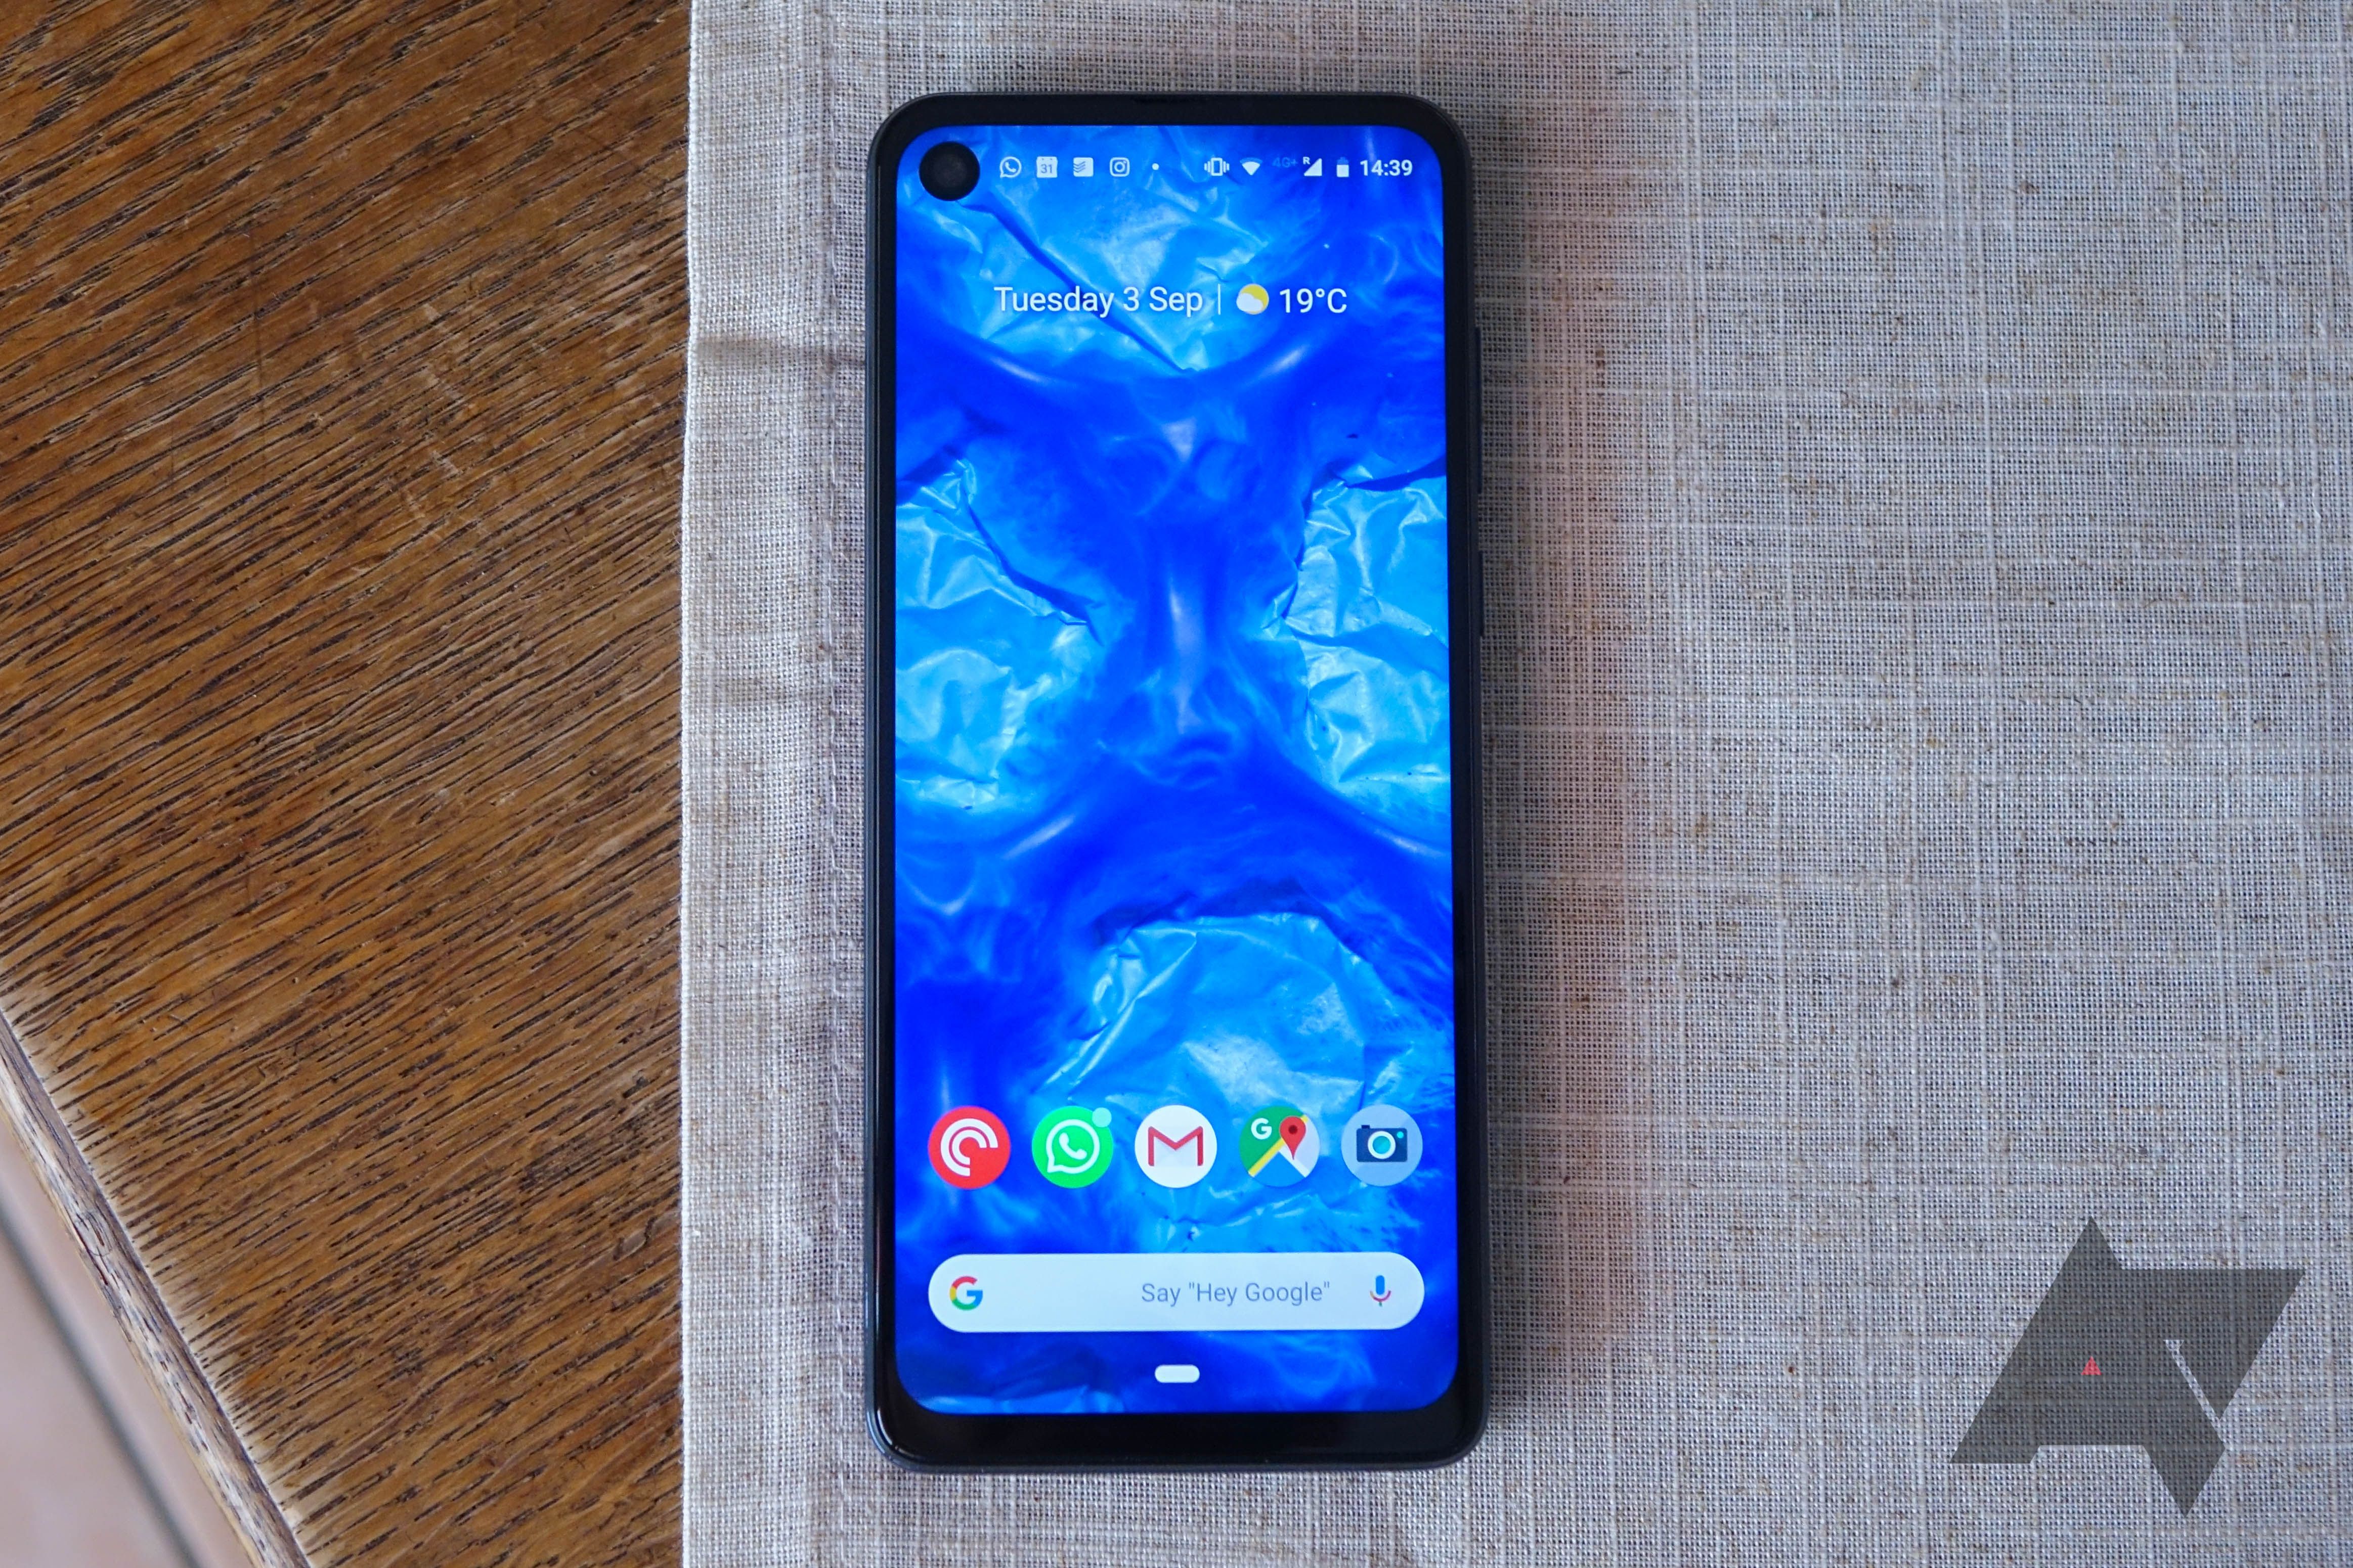 Motorola One Action is already $50 off ($300) at B&H Photo